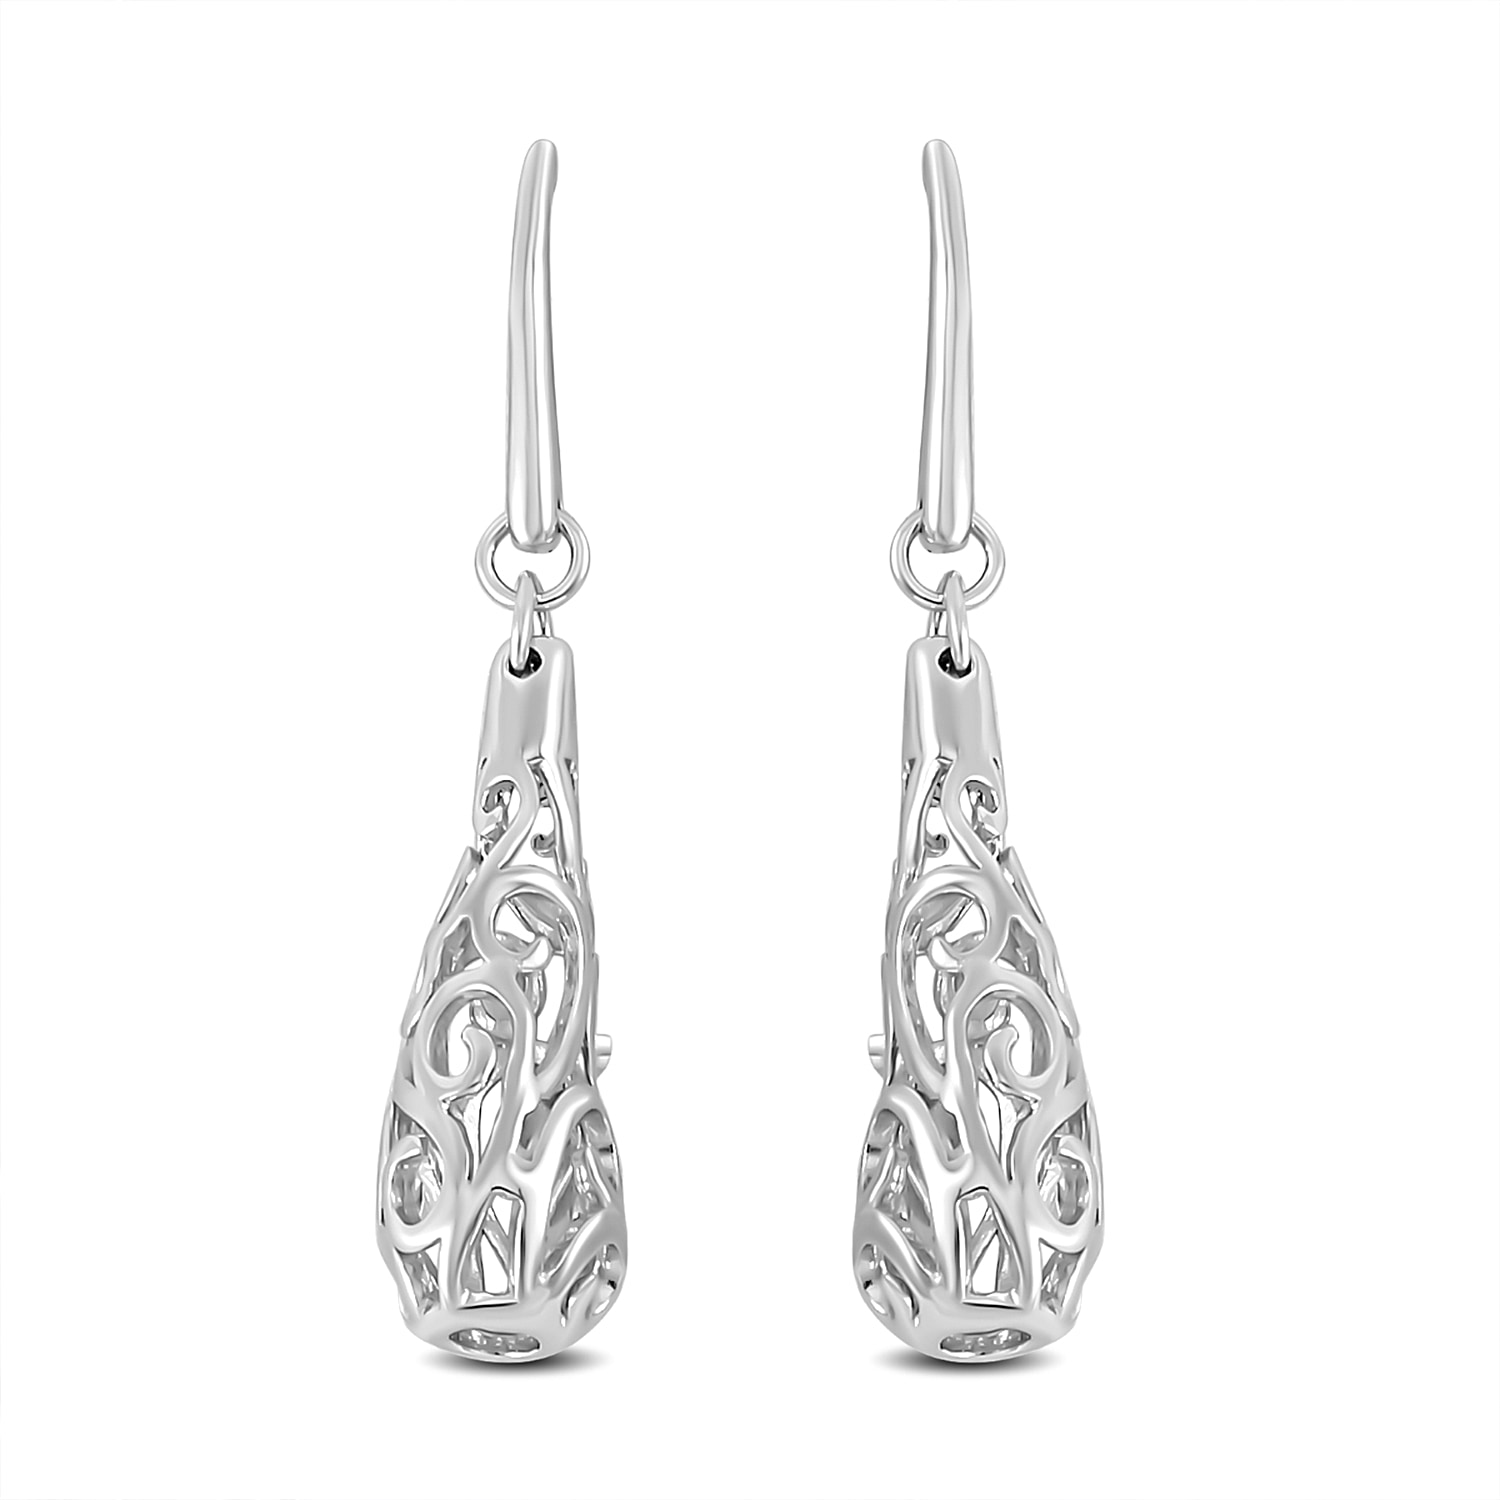 Lucy Q Air Drip Filigree Collection - Rhodium Overlay Sterling Silver, Earrings, Sliver Wt. 6.00 Gms